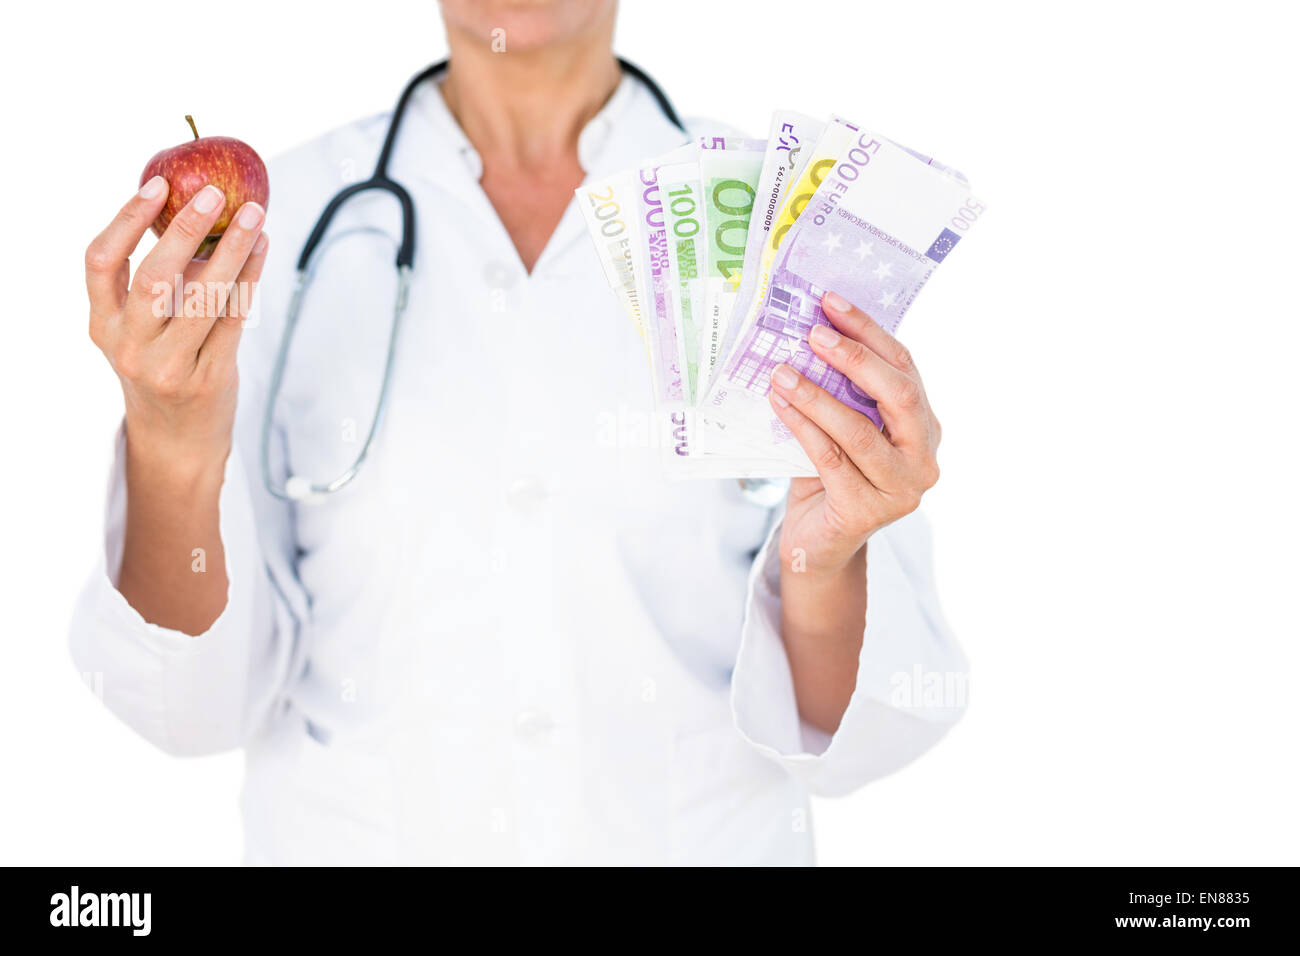 Confident female doctor holding red apple and banknotes Stock Photo